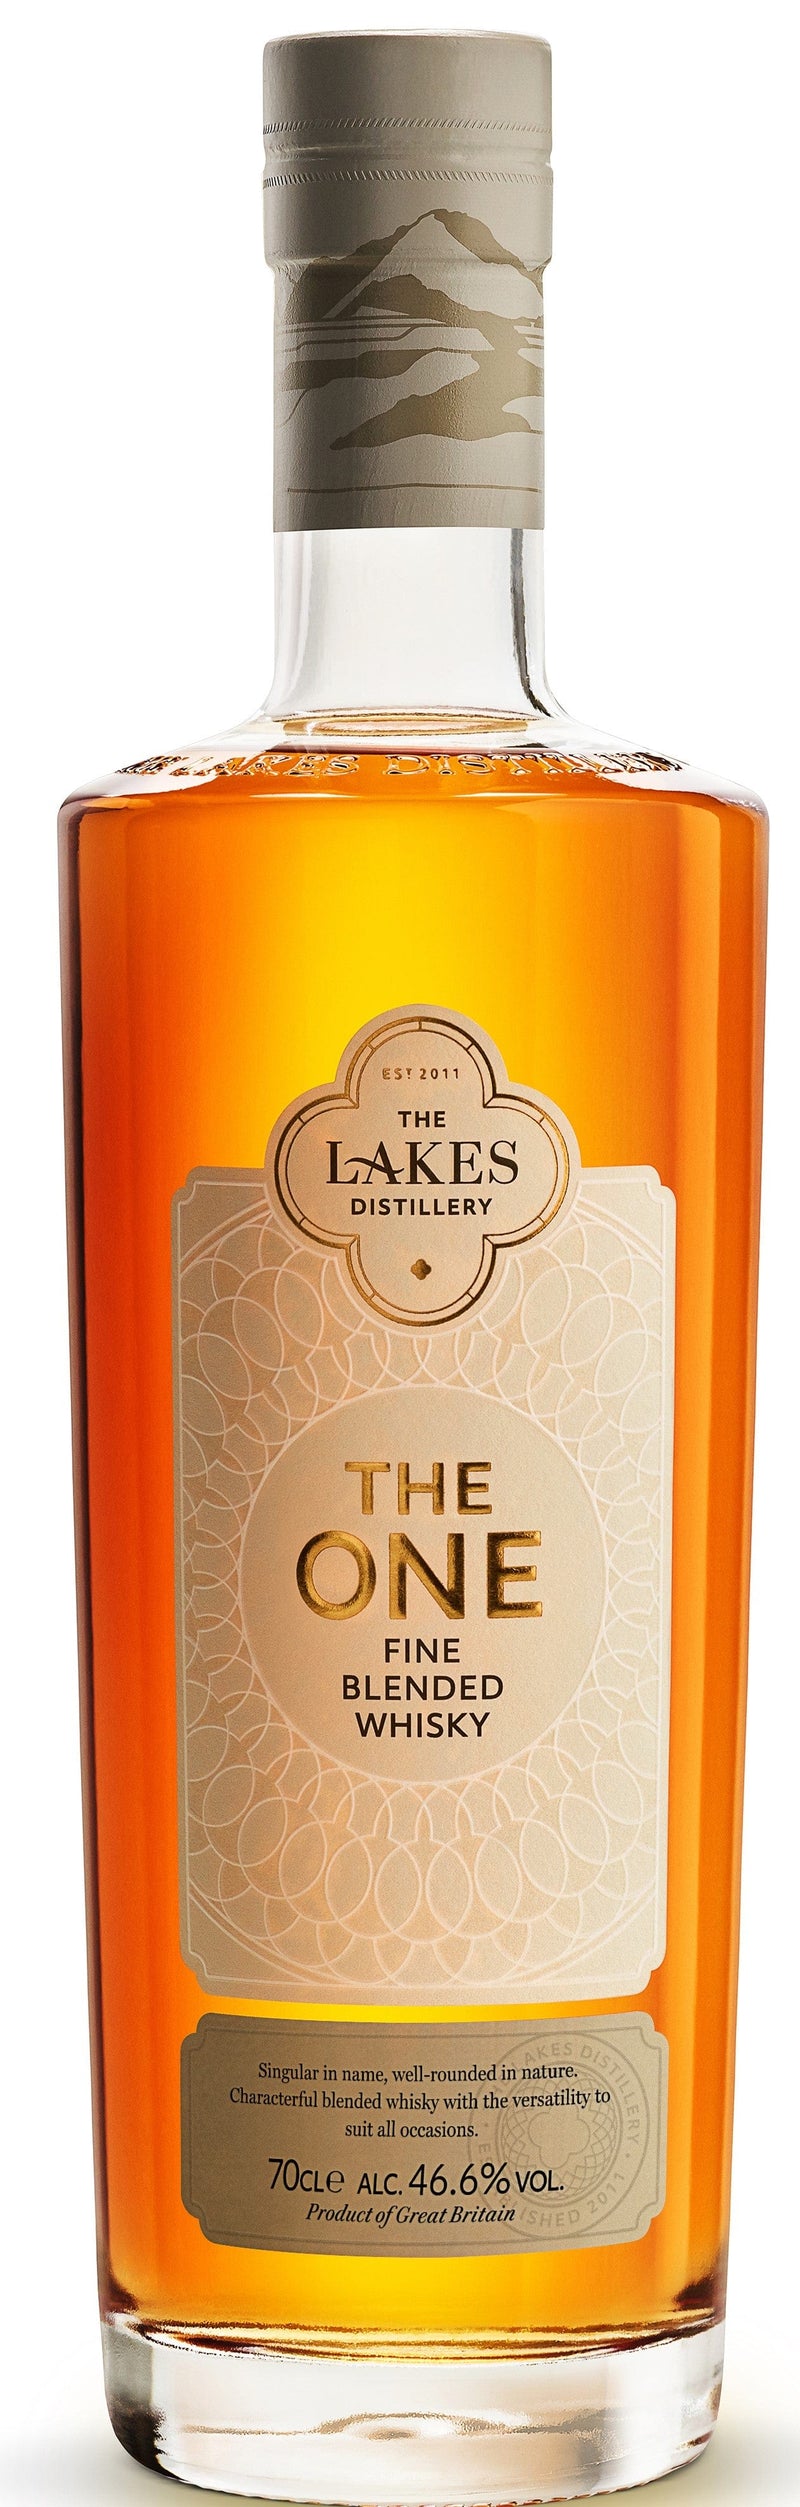 The Lakes The One Fine Blended Whisky 70cl